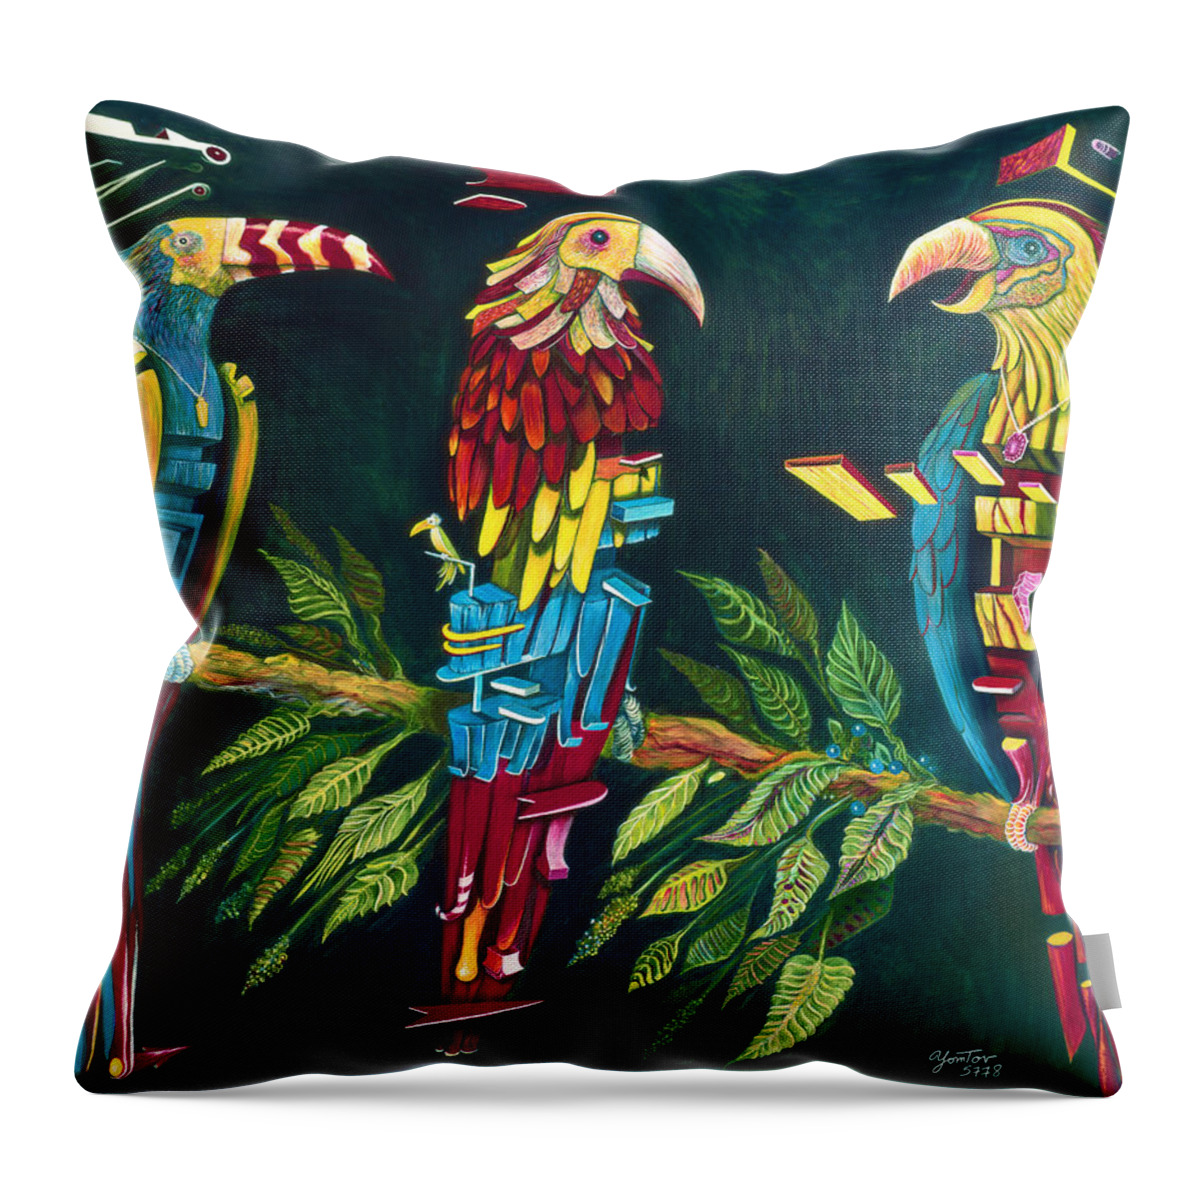 Parrots Throw Pillow featuring the painting Munton Parrots by Yom Tov Blumenthal